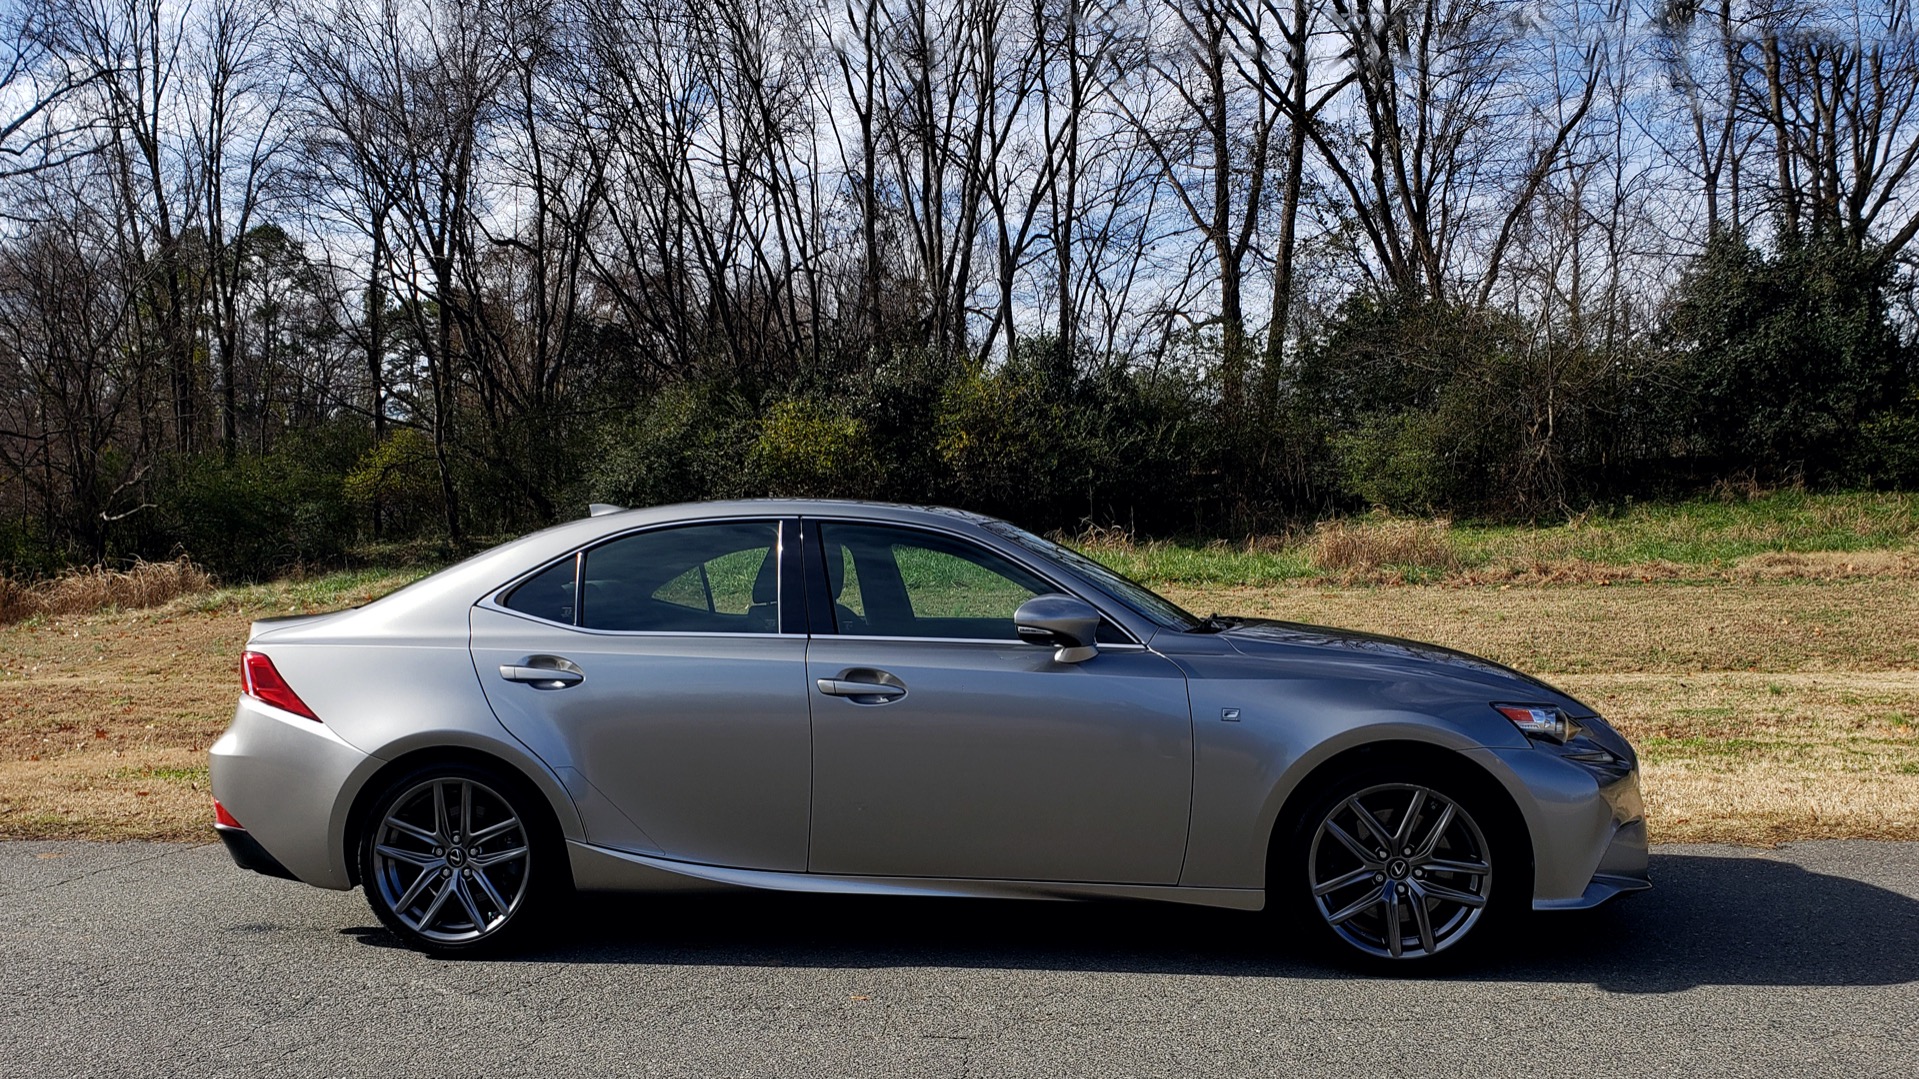 Used 2016 Lexus IS 200t F-SPORT / SUNROOF / NAV / BSM / DYNAMIC RADAR CRUISE for sale Sold at Formula Imports in Charlotte NC 28227 10